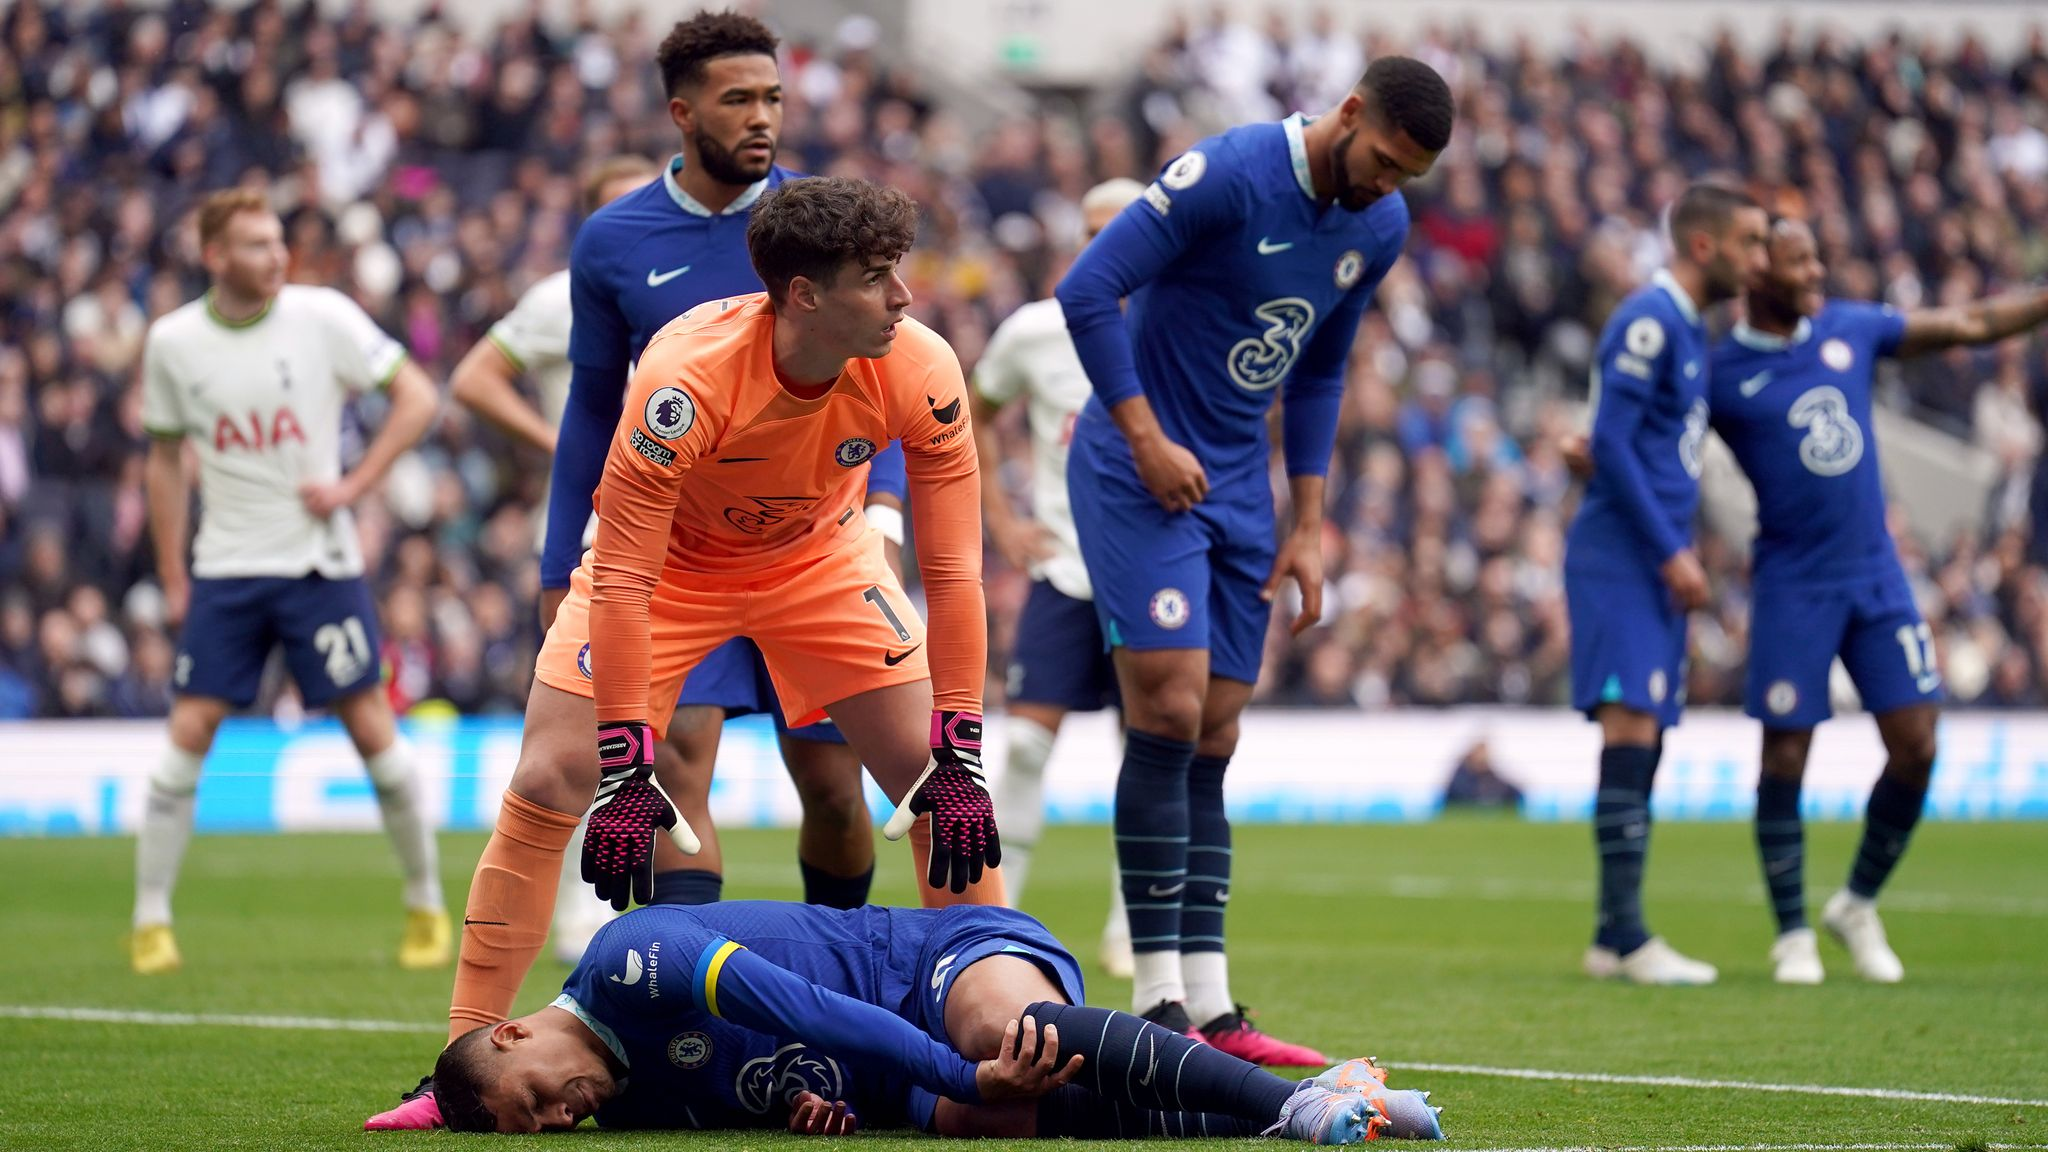 Thiago Silva Injury Update: Chelsea suffer BIG BLOW amid winless run, Thiago Silva RULED OUT for 6 weeks with knee injury - Check out